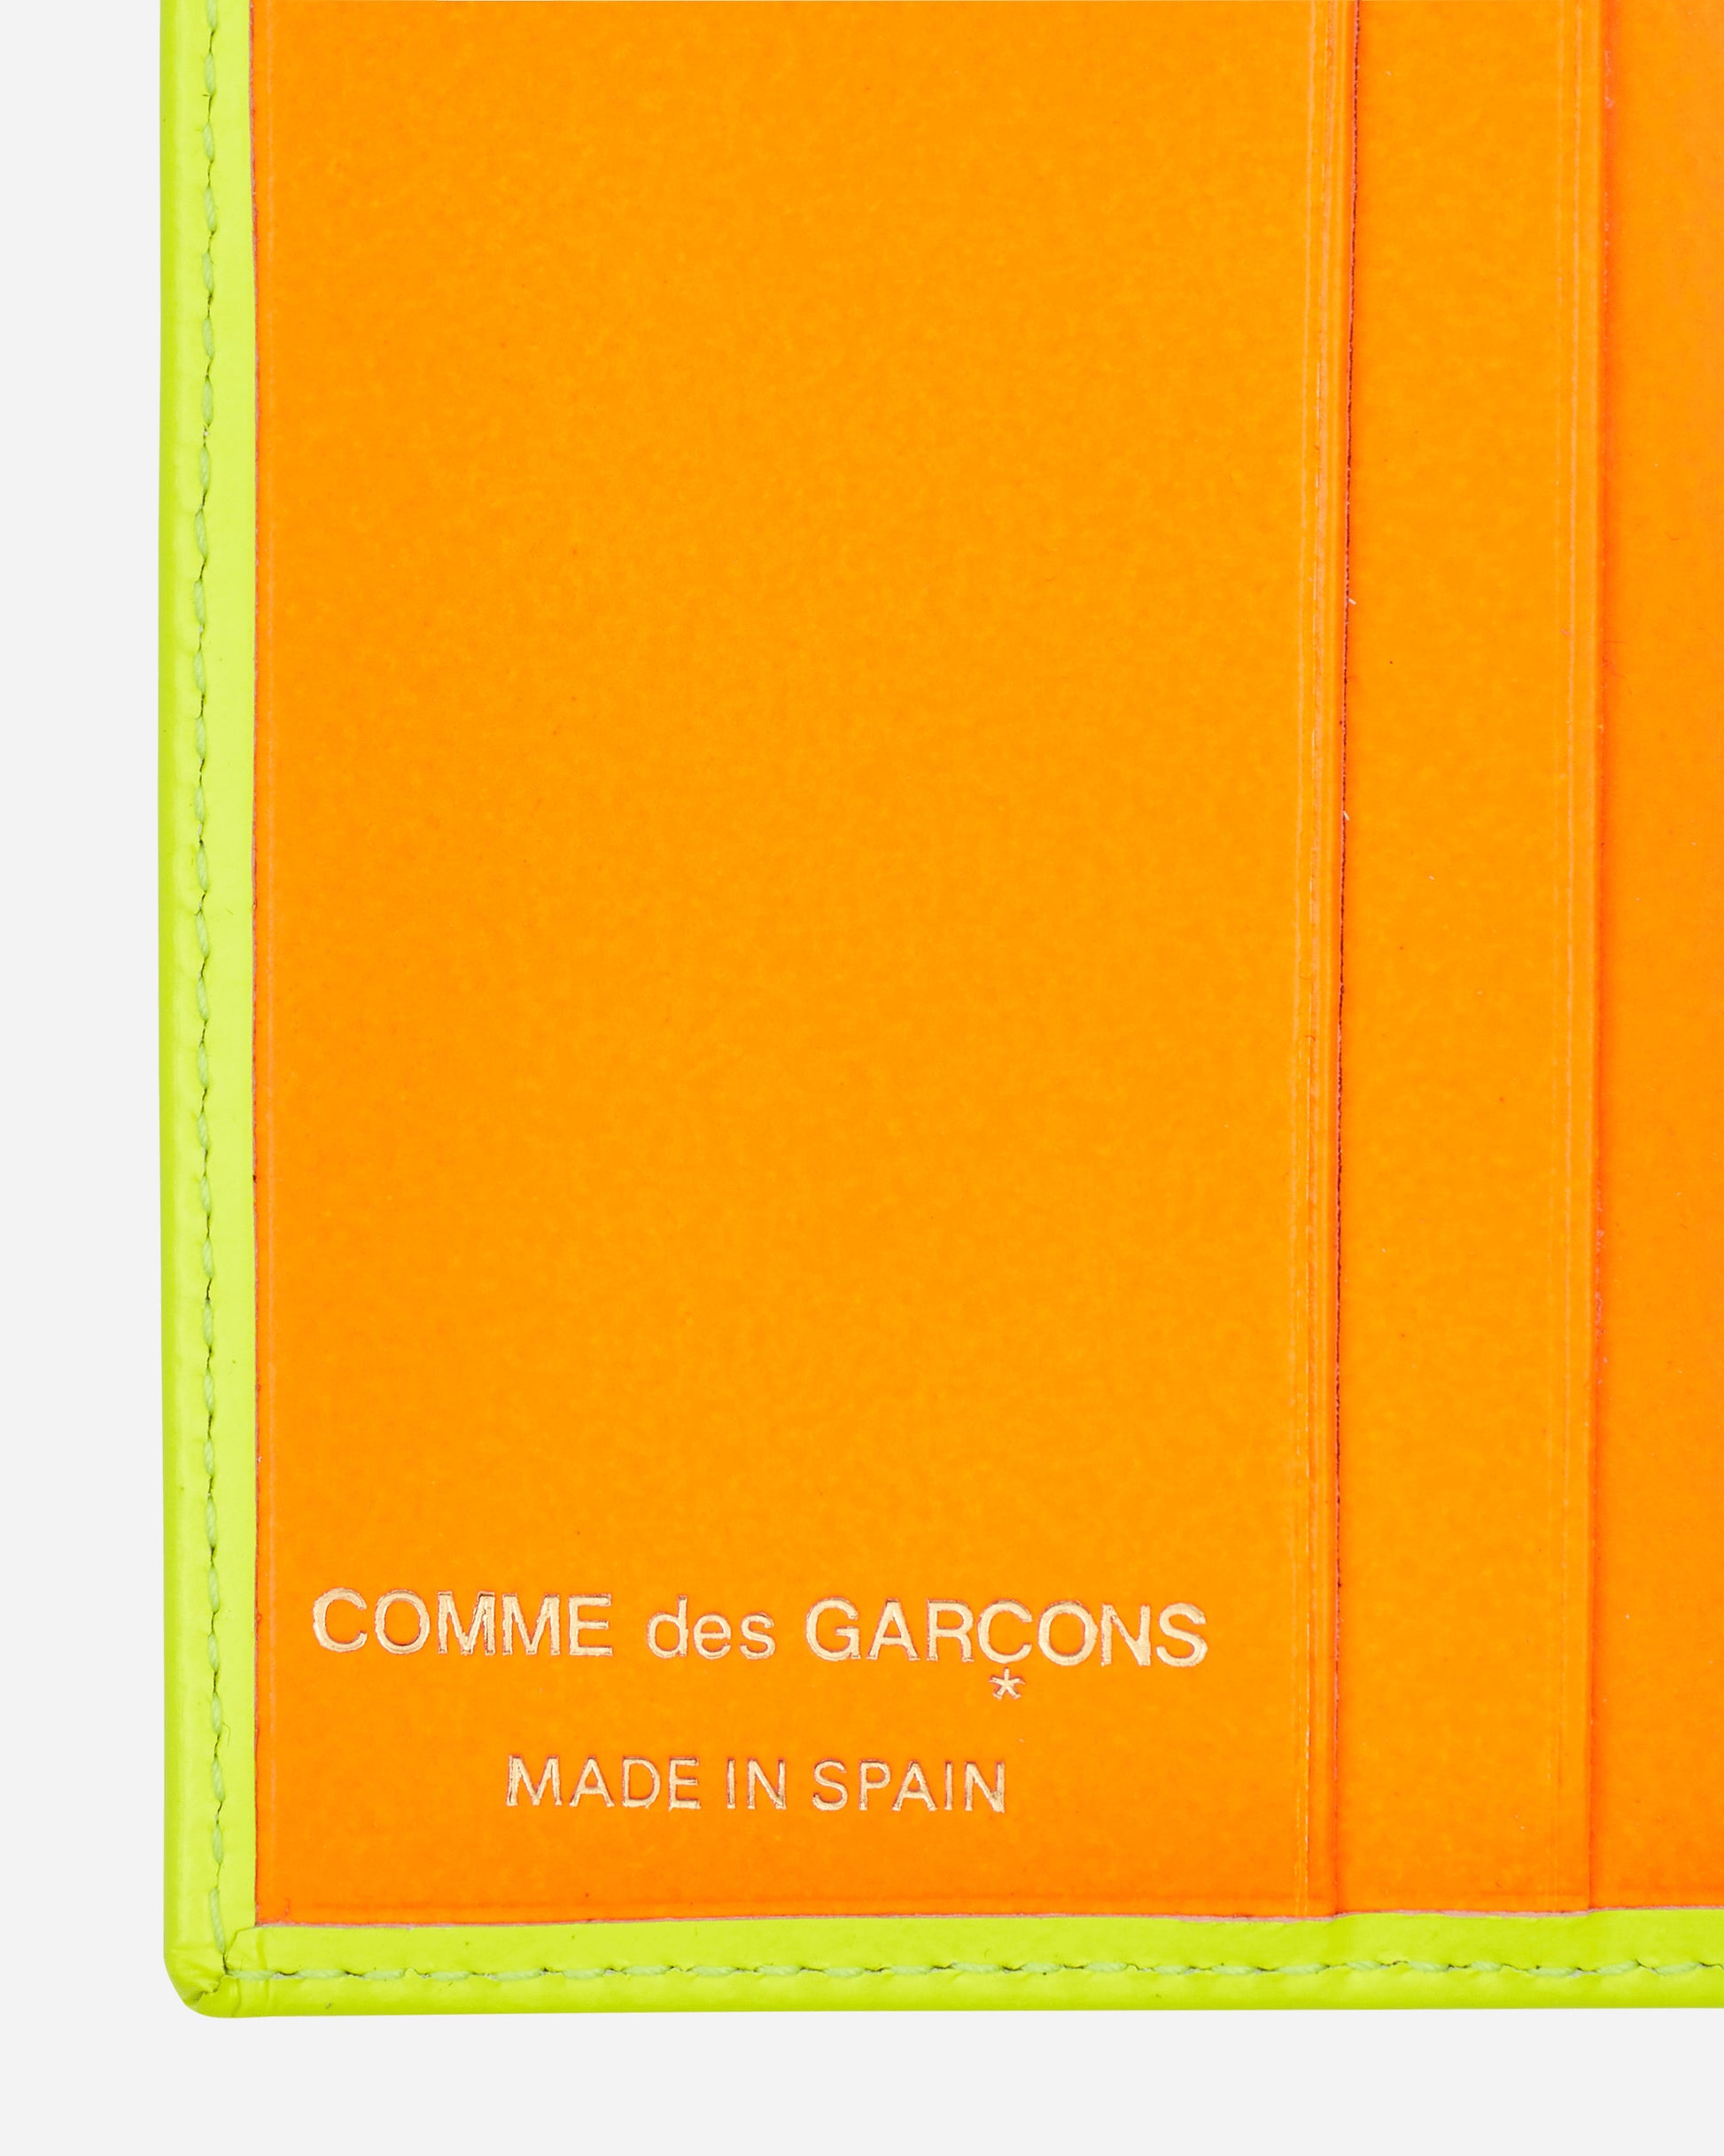 Comme Des Garçons Wallet Super Fluo Wallet Yellow/Orange Wallets and Cardholders Wallets SA0641SF 4